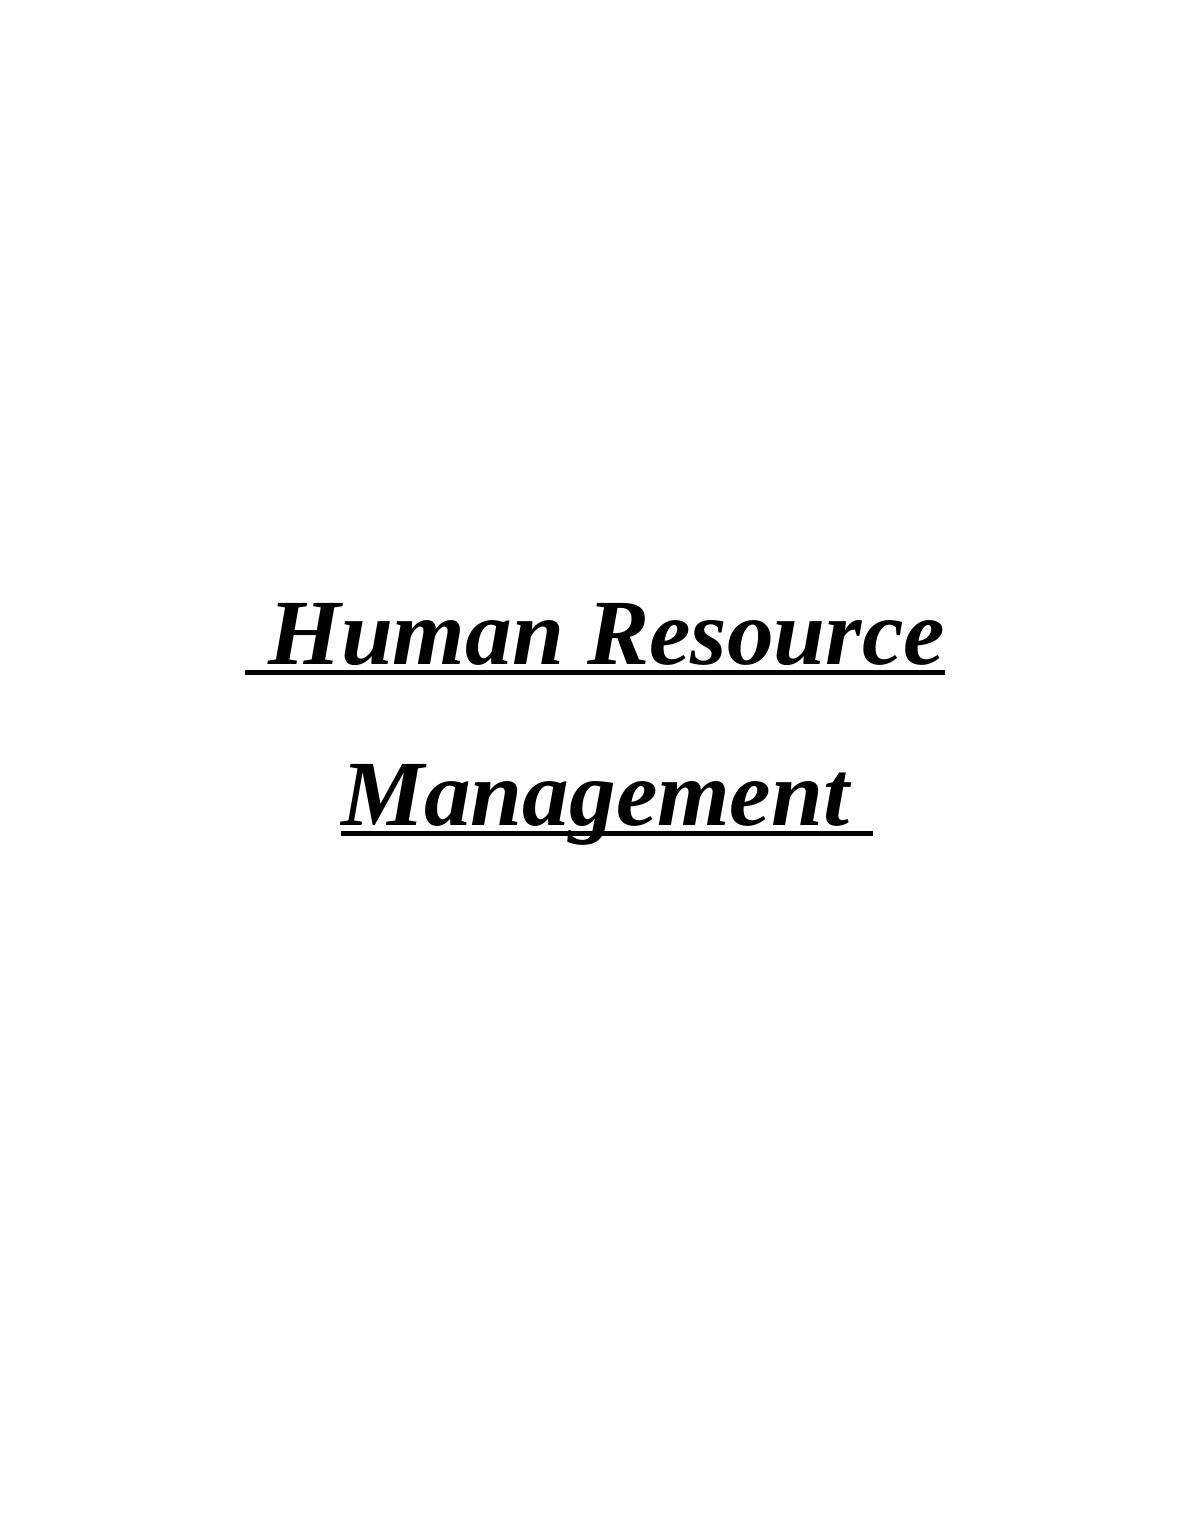 Human Resource Management: Recruitment and Selection at Tesco_1